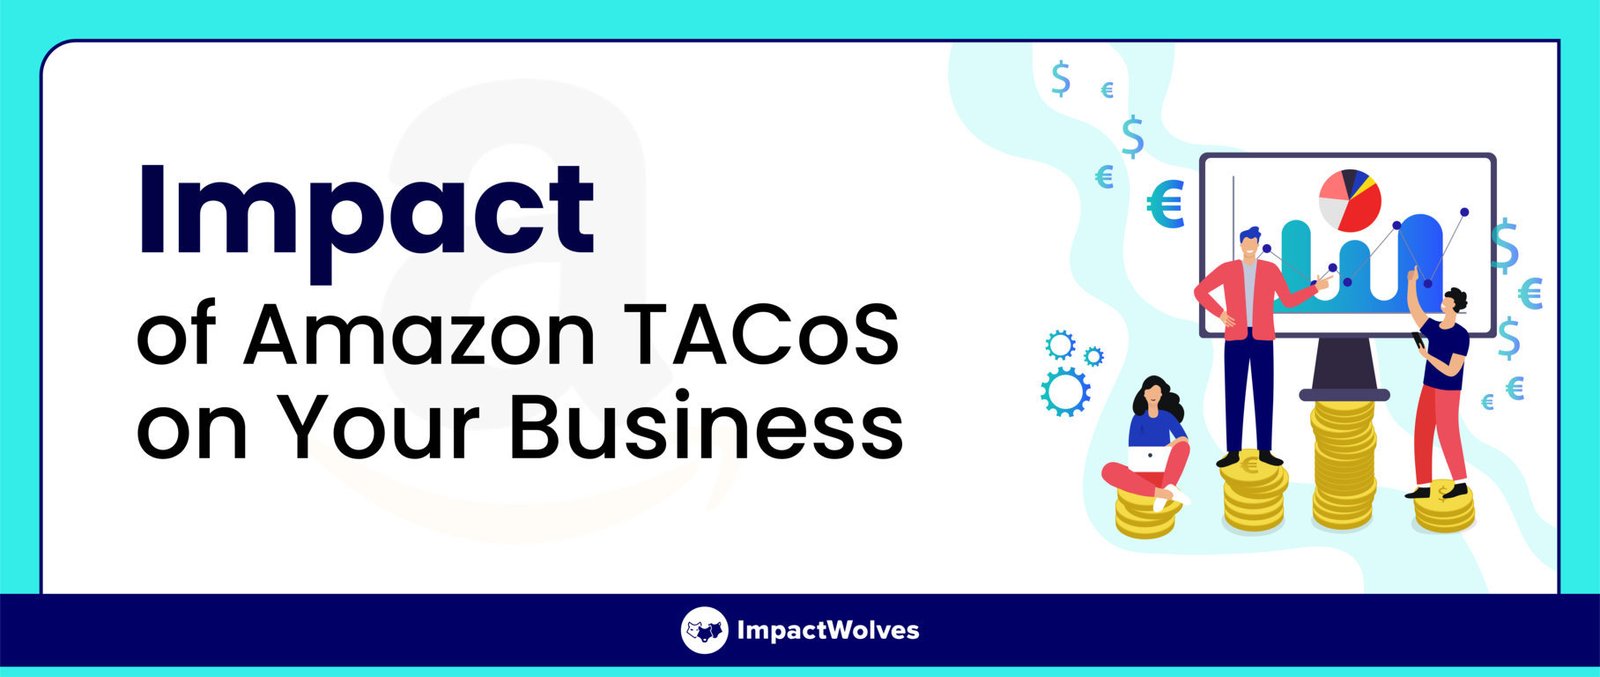 Impact of Amazon TACoS on Your Business